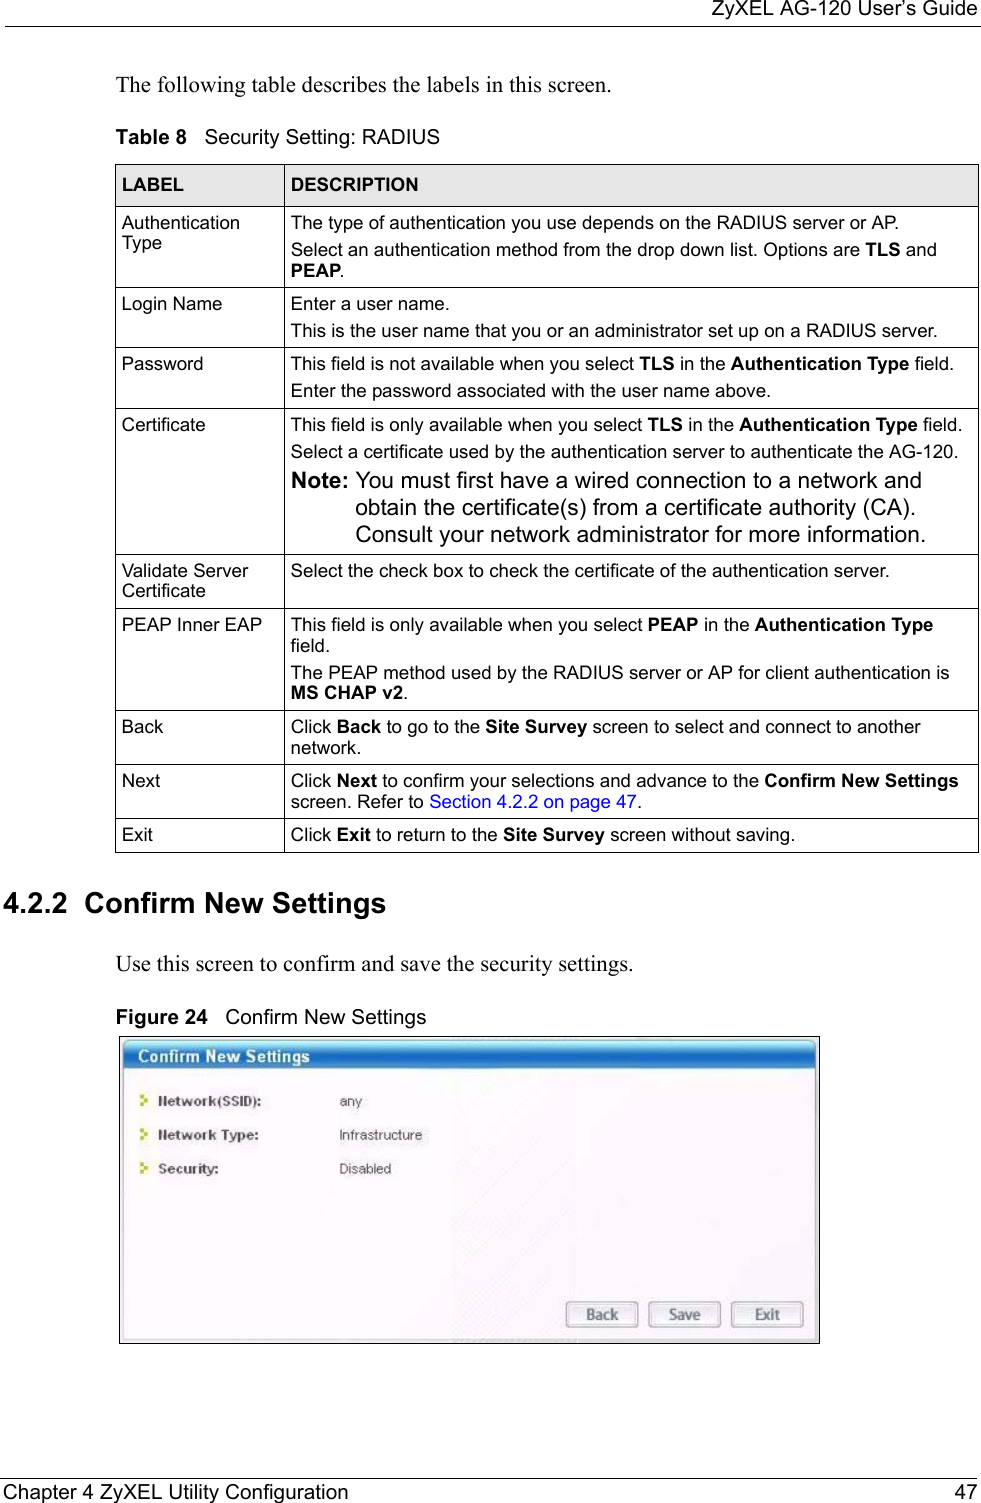 ZyXEL AG-120 User’s GuideChapter 4 ZyXEL Utility Configuration 47The following table describes the labels in this screen.  4.2.2  Confirm New SettingsUse this screen to confirm and save the security settings.Figure 24   Confirm New Settings Table 8   Security Setting: RADIUSLABEL DESCRIPTIONAuthentication TypeThe type of authentication you use depends on the RADIUS server or AP.Select an authentication method from the drop down list. Options are TLS and PEAP.Login Name Enter a user name. This is the user name that you or an administrator set up on a RADIUS server.Password This field is not available when you select TLS in the Authentication Type field. Enter the password associated with the user name above. Certificate This field is only available when you select TLS in the Authentication Type field. Select a certificate used by the authentication server to authenticate the AG-120.Note: You must first have a wired connection to a network and obtain the certificate(s) from a certificate authority (CA). Consult your network administrator for more information.Validate Server CertificateSelect the check box to check the certificate of the authentication server.PEAP Inner EAP This field is only available when you select PEAP in the Authentication Type field.The PEAP method used by the RADIUS server or AP for client authentication is MS CHAP v2.Back Click Back to go to the Site Survey screen to select and connect to another network.Next Click Next to confirm your selections and advance to the Confirm New Settings screen. Refer to Section 4.2.2 on page 47. Exit Click Exit to return to the Site Survey screen without saving.